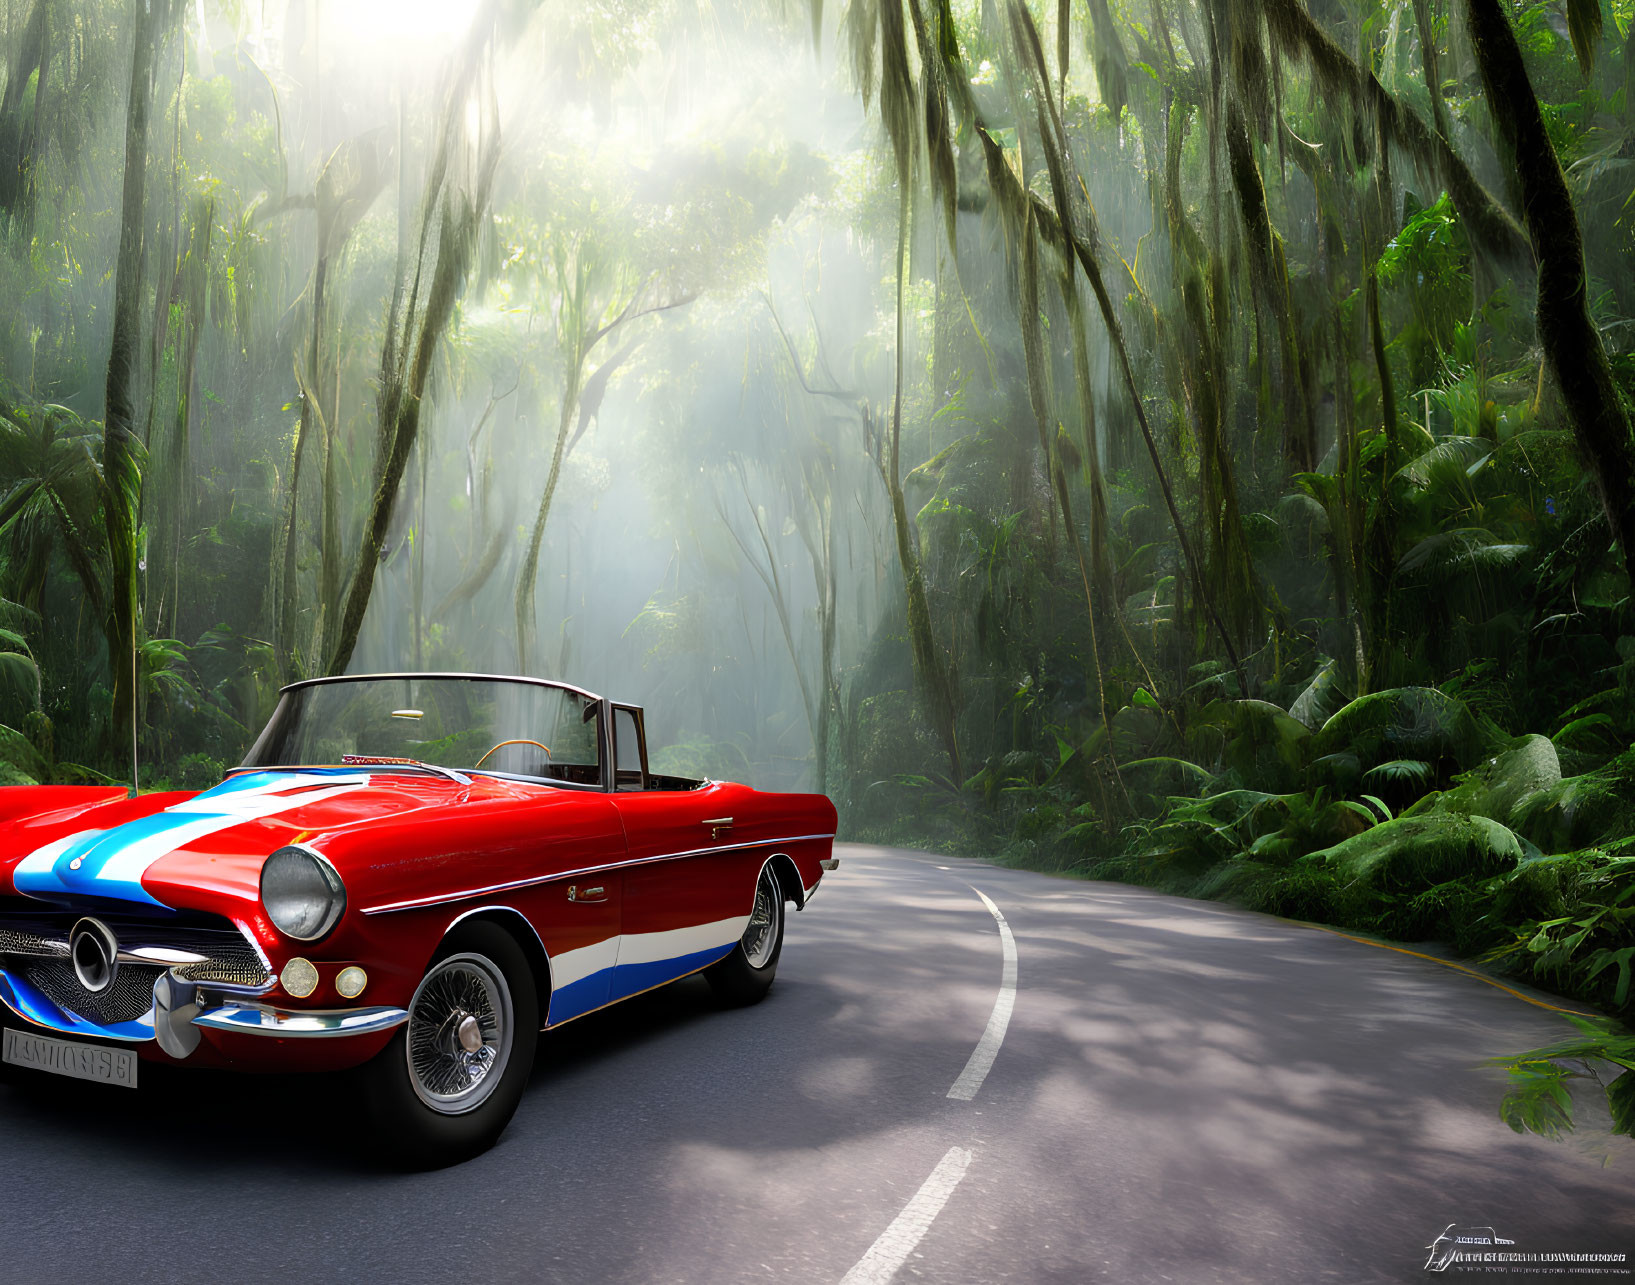 Red and White Convertible Car in Forest Setting